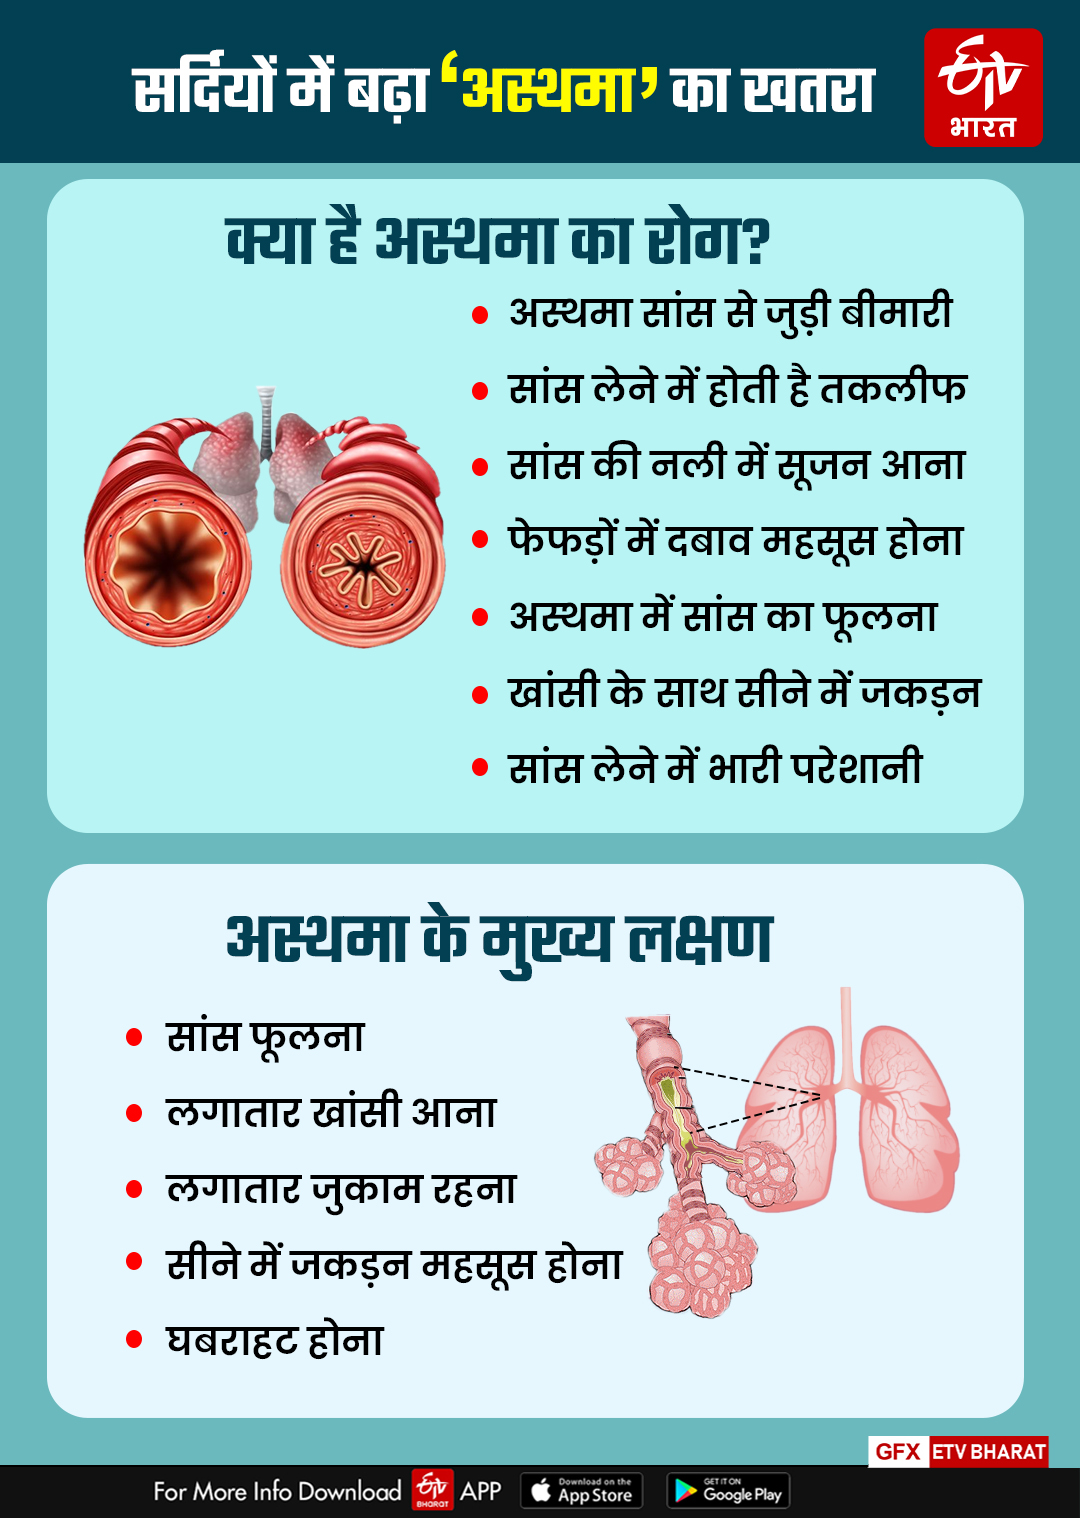 Asthma Treatment With Home Remedies